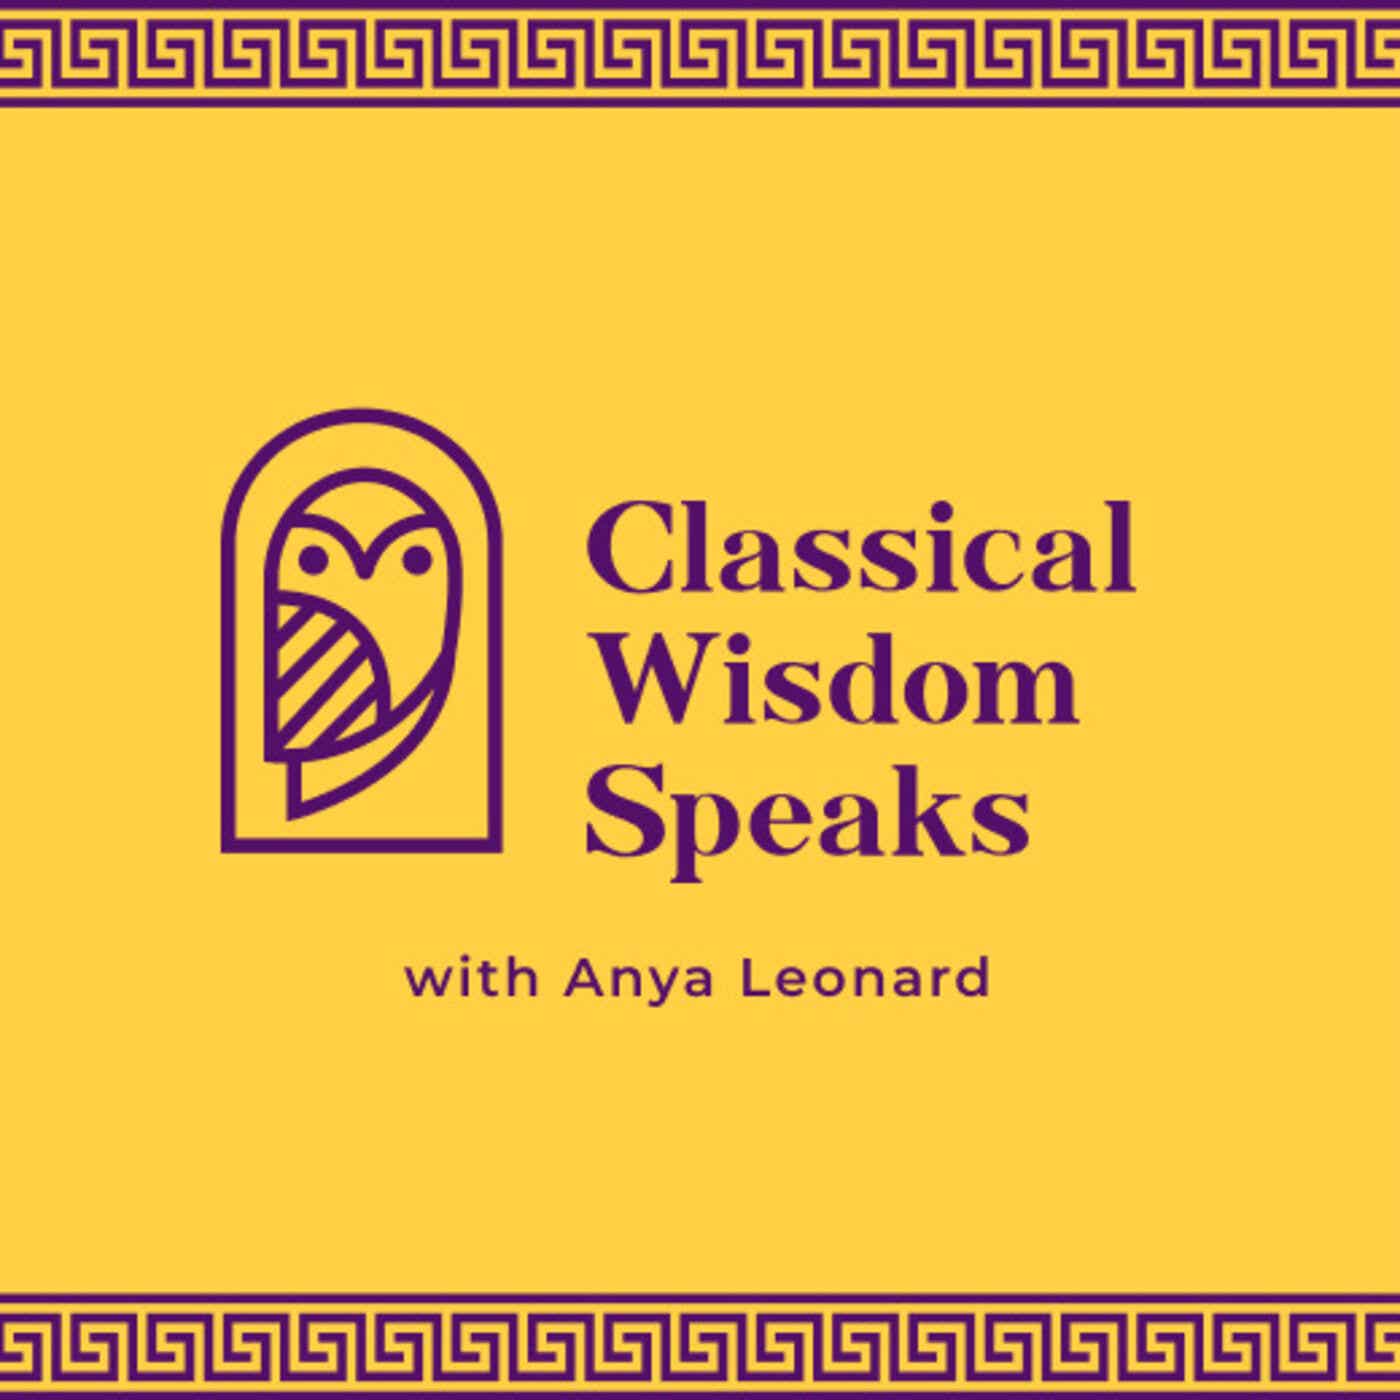 Classical Wisdom Speaks (private feed for nstraub@gmail.com)